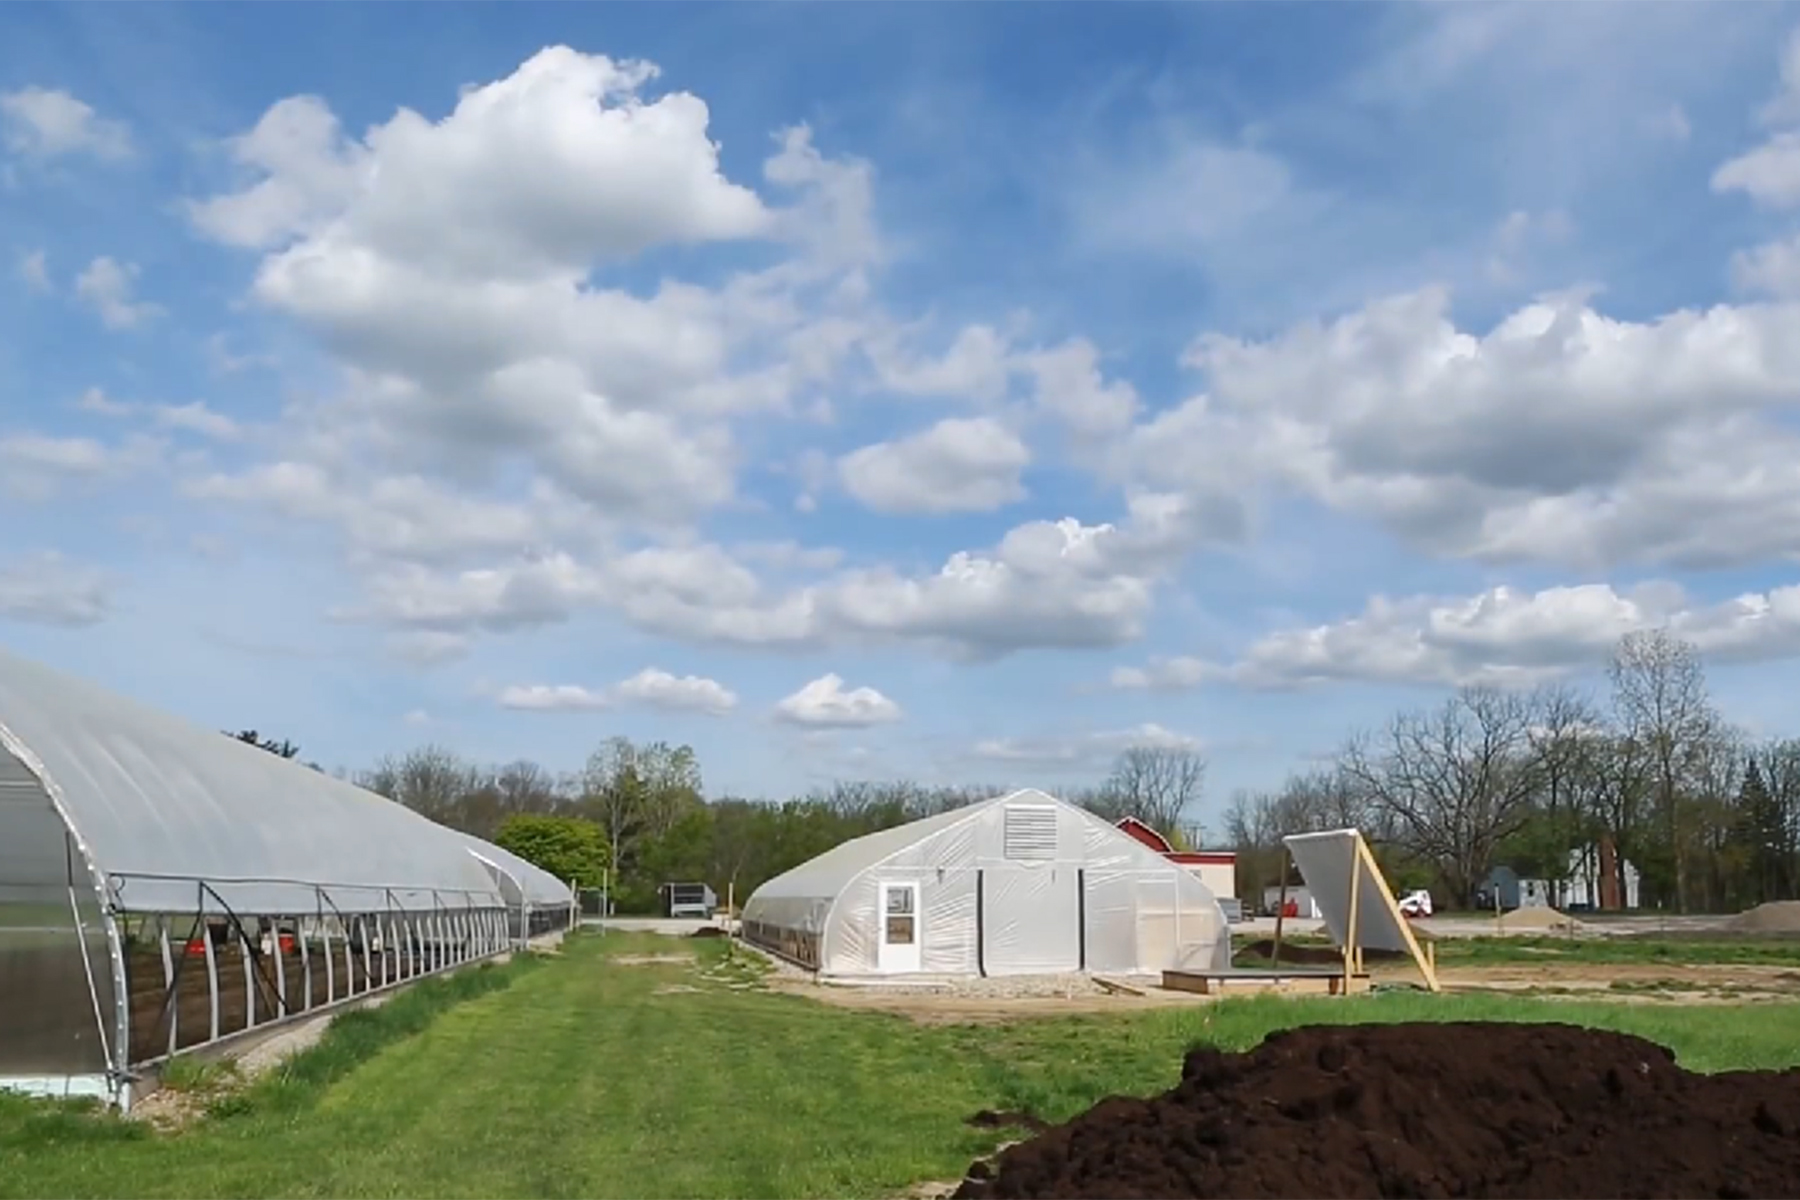 PHOTO: A screen grab from "The Farm at St Joseph Mercy Hospital" video on YouTube.